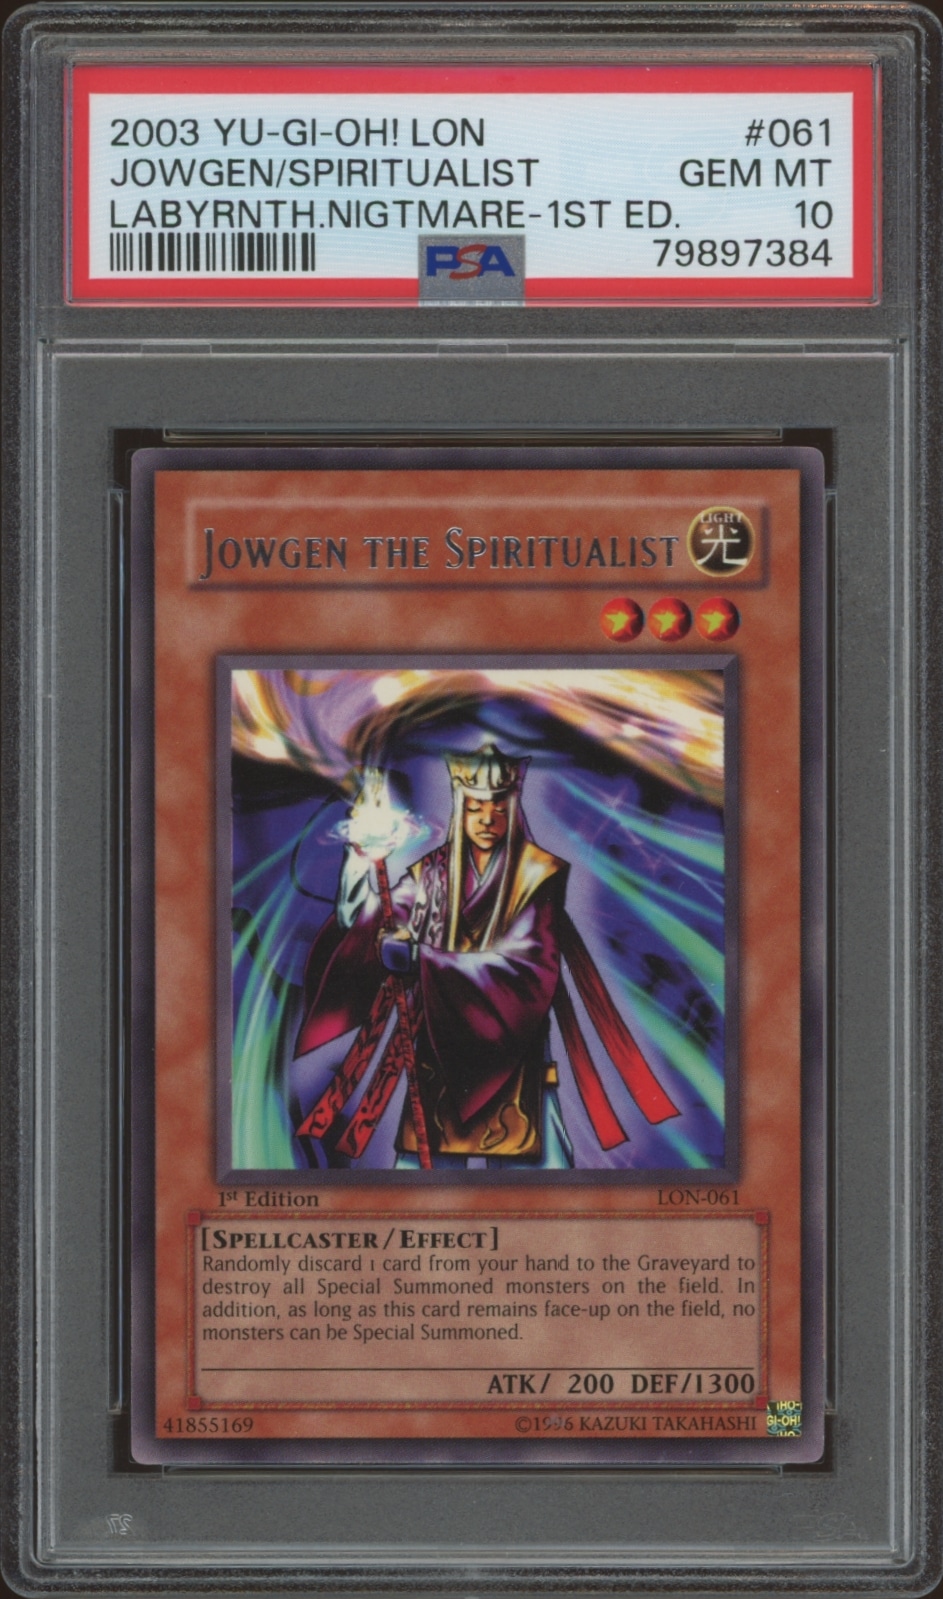 First Edition PSA 10 Jowgen the Spiritualist card from 2003 Yu-Gi-Oh! Labyrinth of Nightmare.